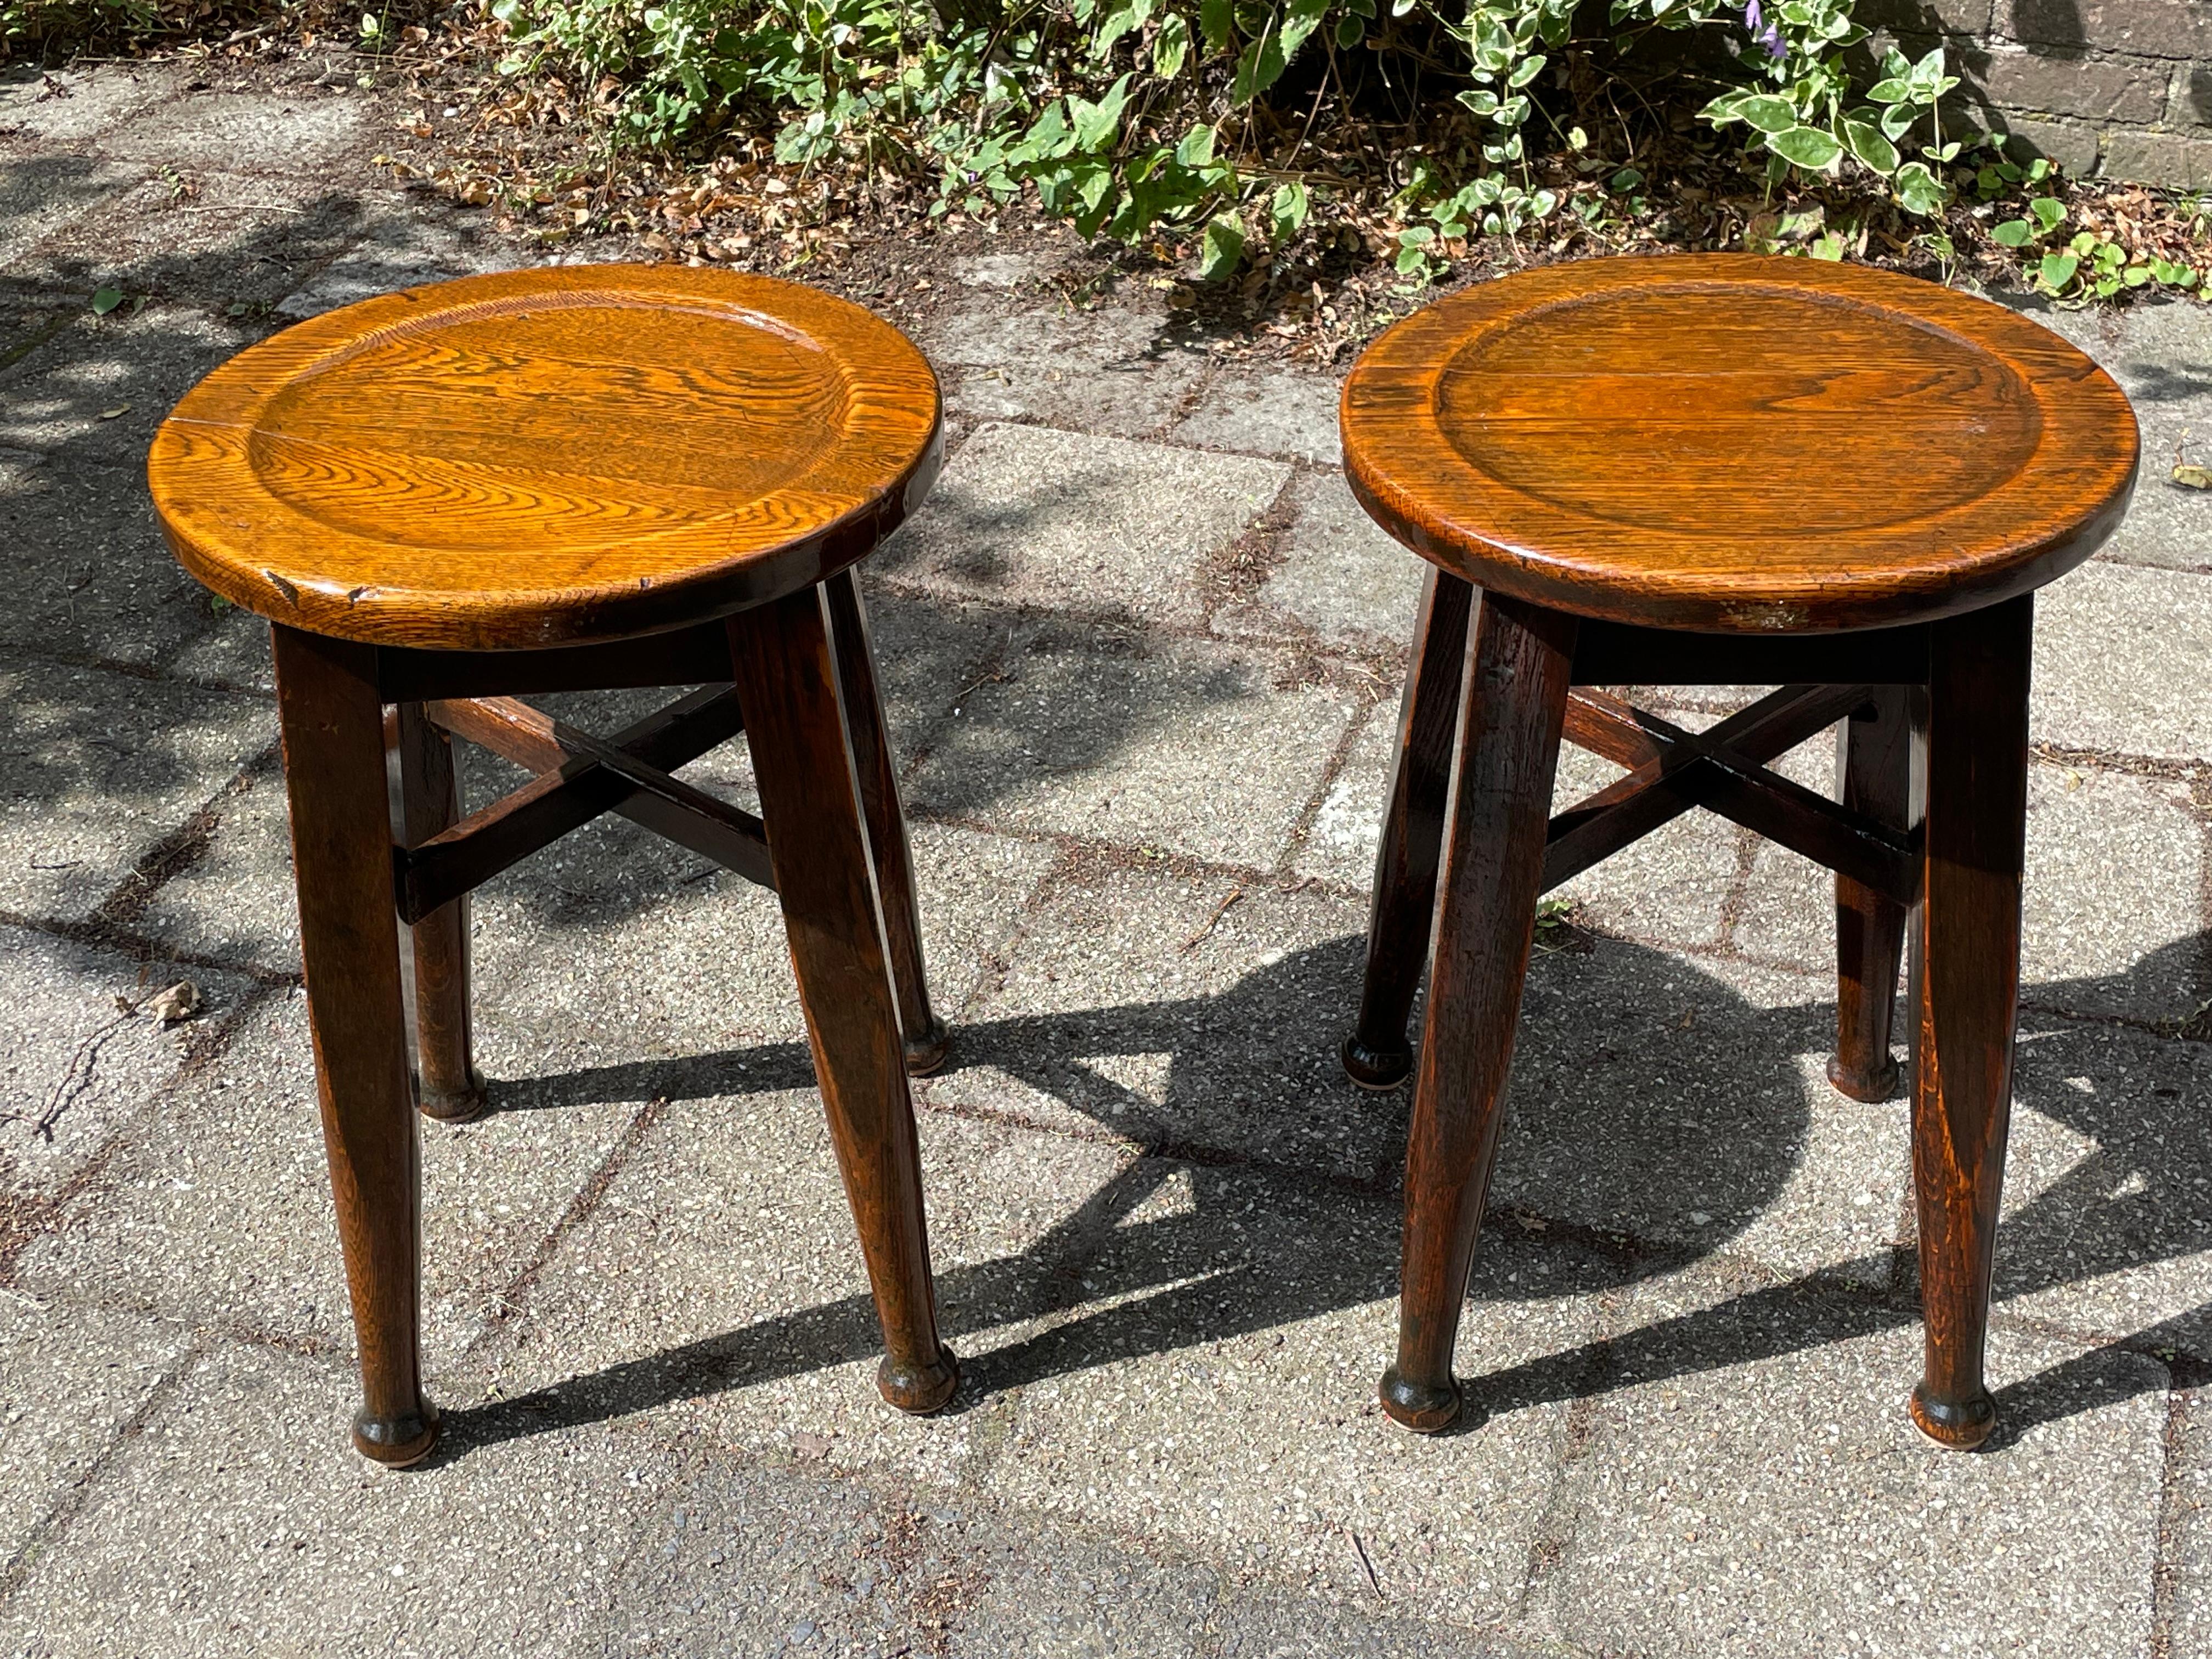 Hand-Crafted Handmade Antique Pair of Arts and Crafts Style Oak Stools by Gaskell & Chambers For Sale